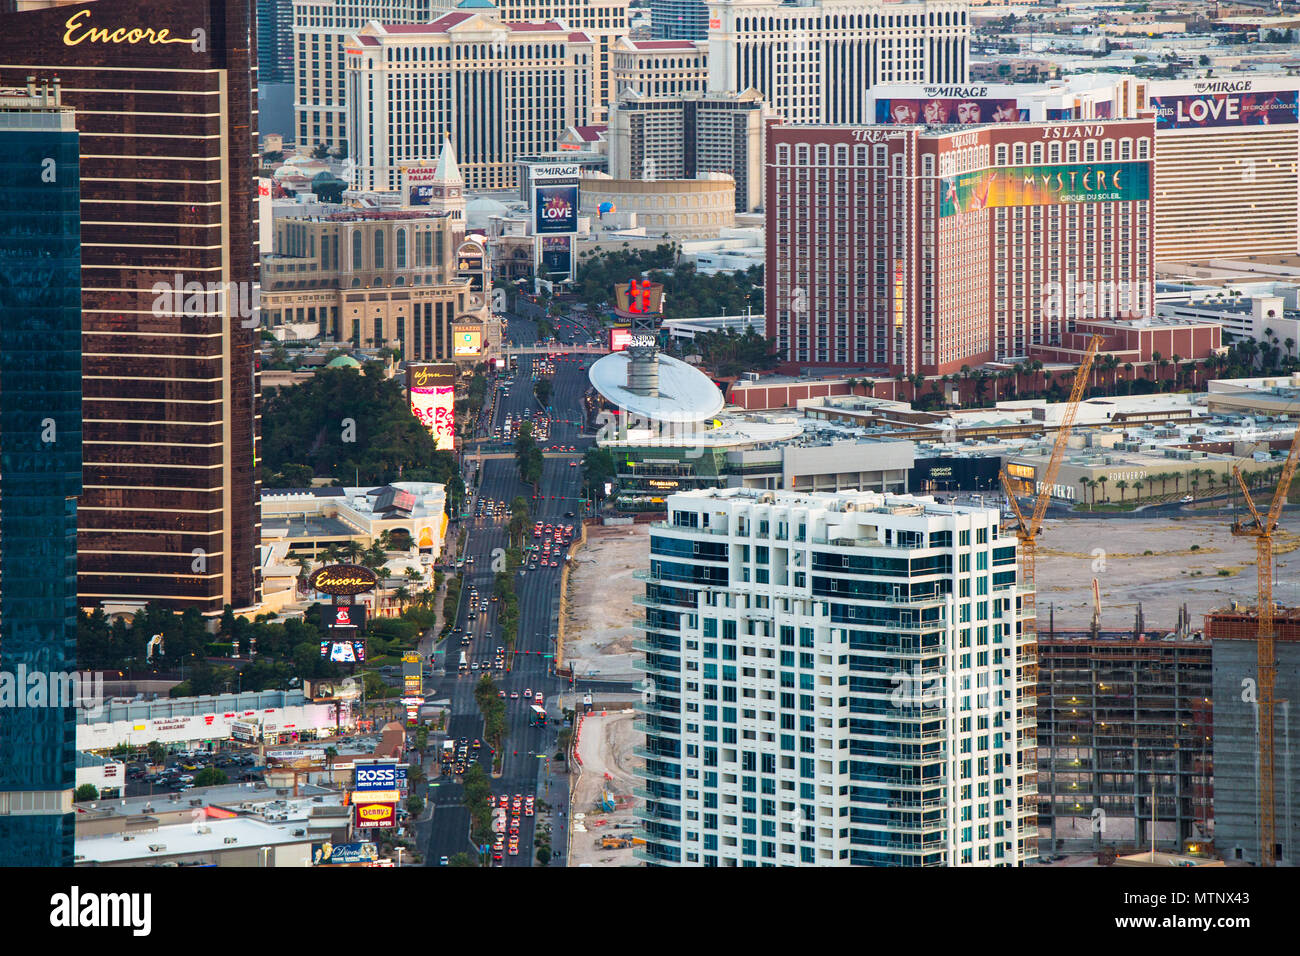 LAS VEGAS, NEVADA - MAY 15, 2018: View of world famous Las Vegas Boulevard also know as The Vegas Strip, with many luxury resort casino hotels in view Stock Photo